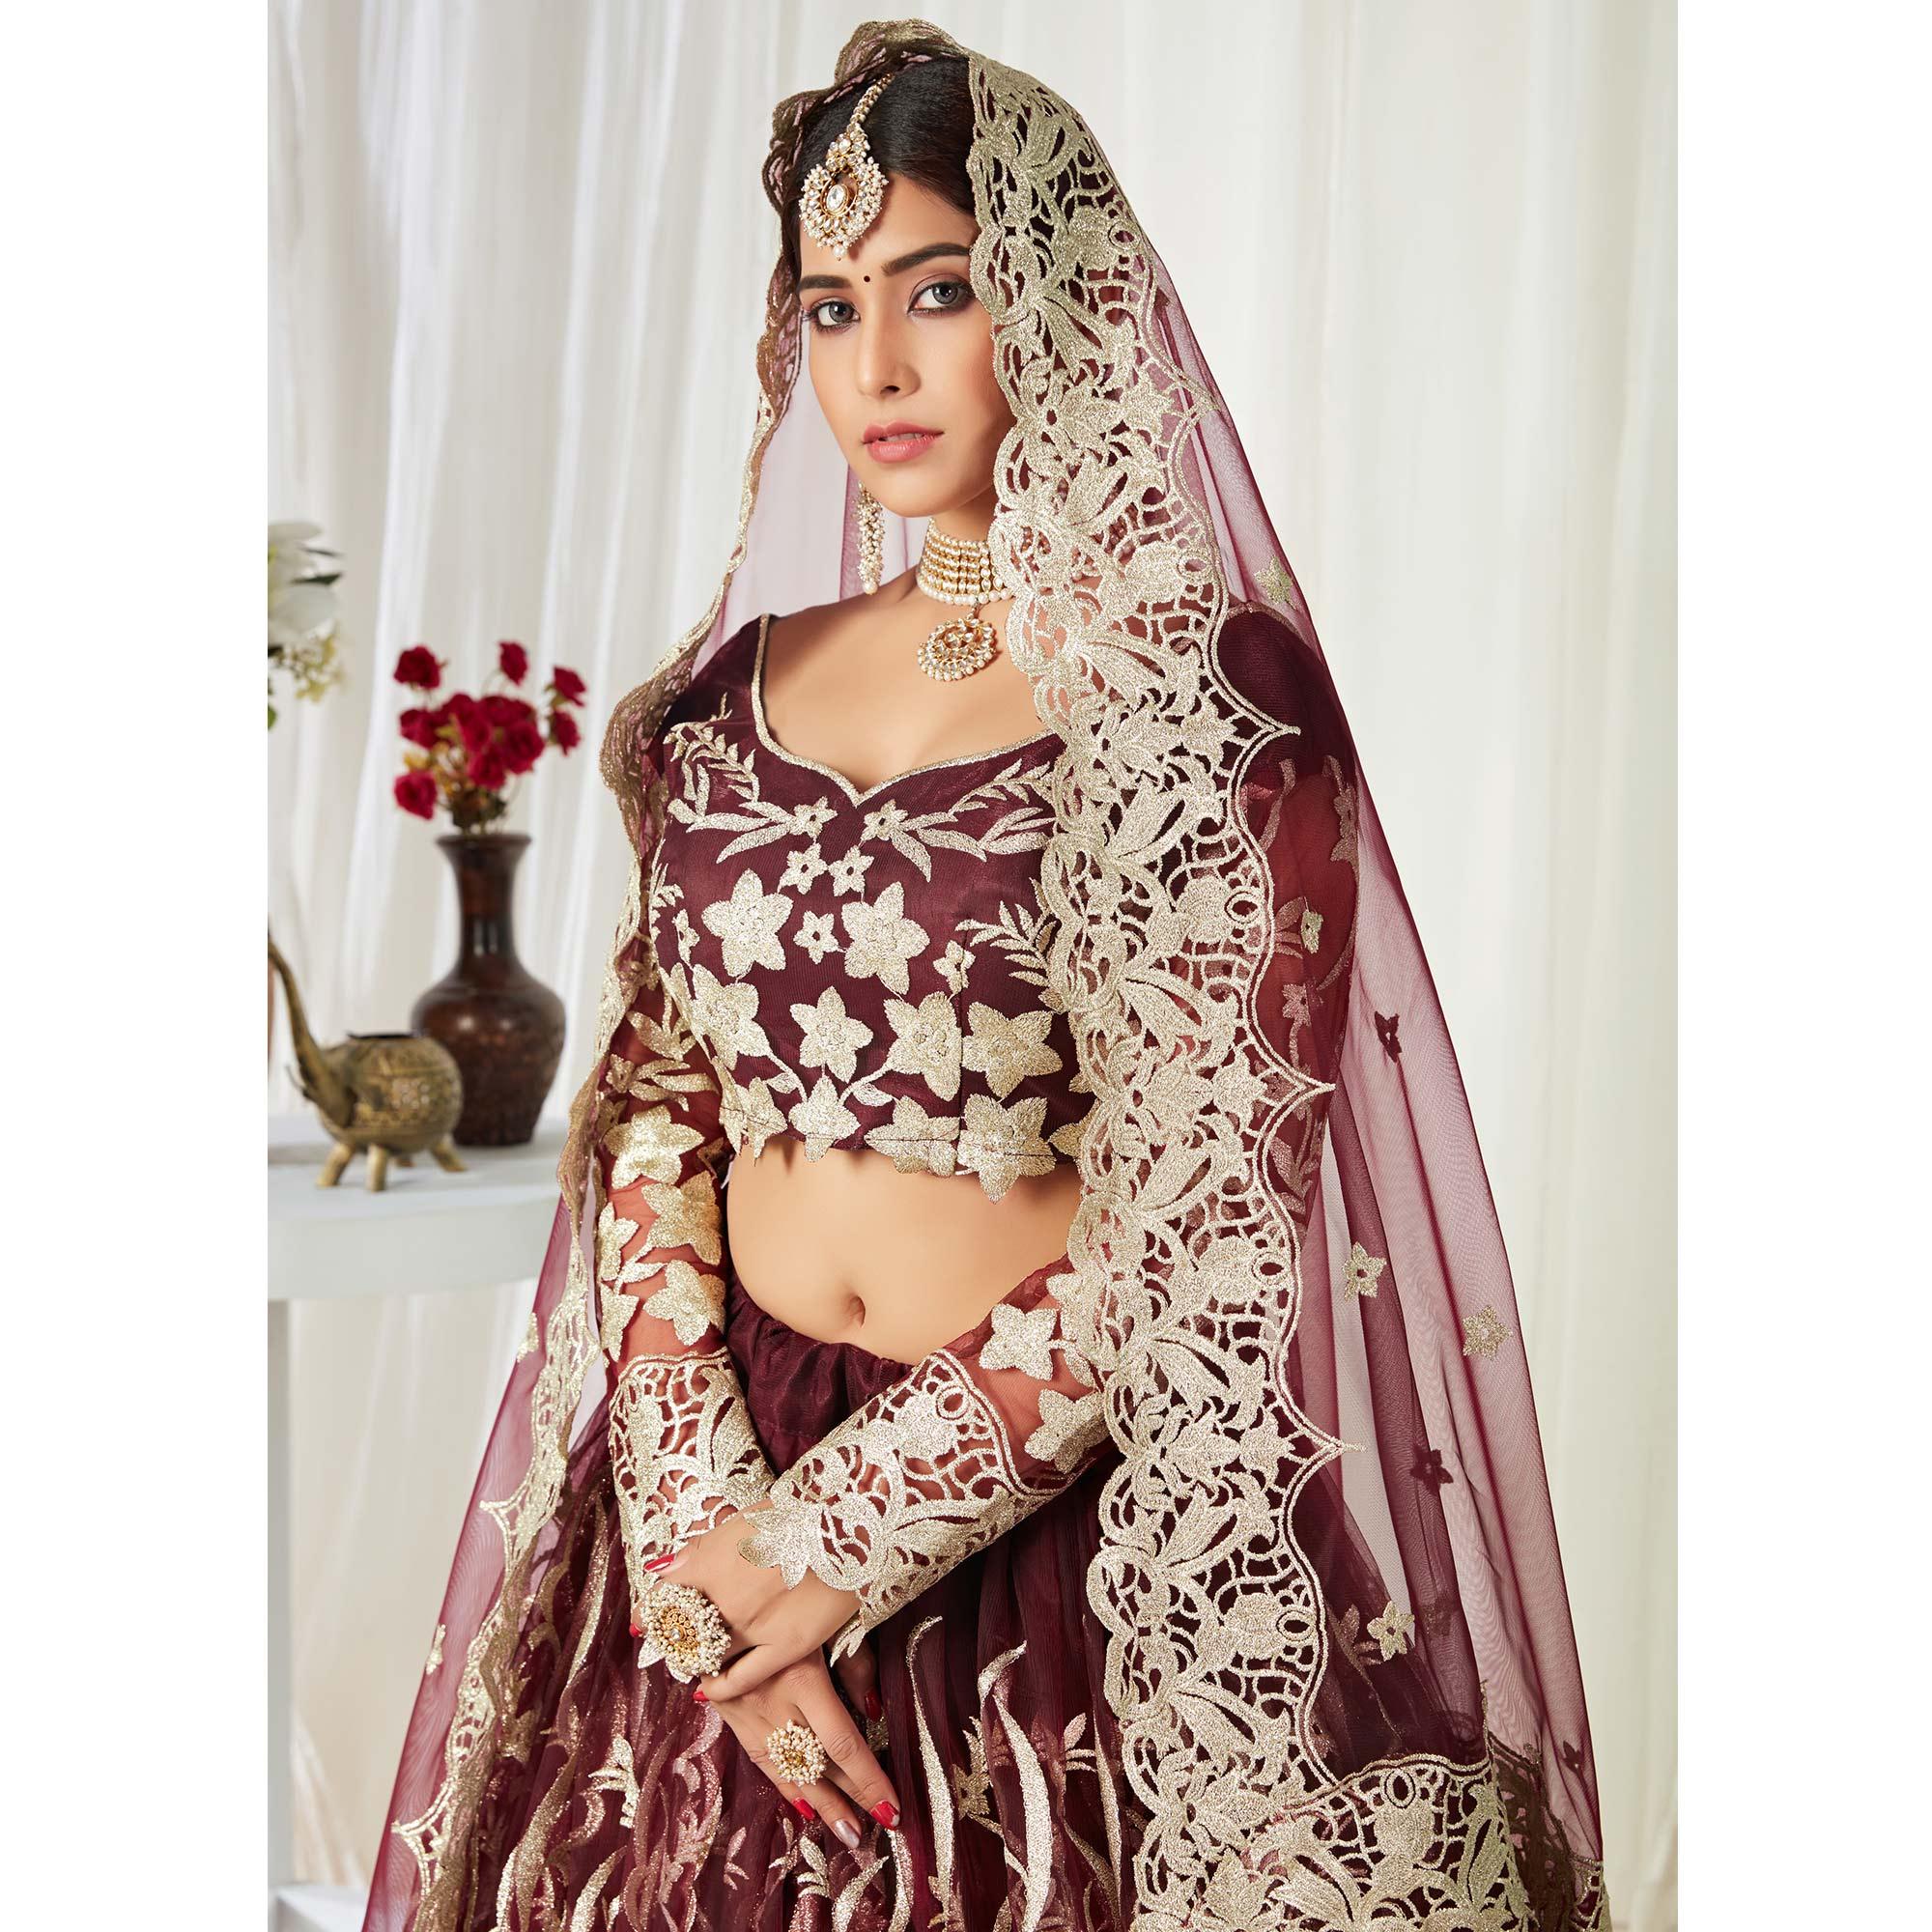 Entrancing Maroon Colored Wedding Wear Butterfly Net With Embroidered Lehenga Choli - Peachmode